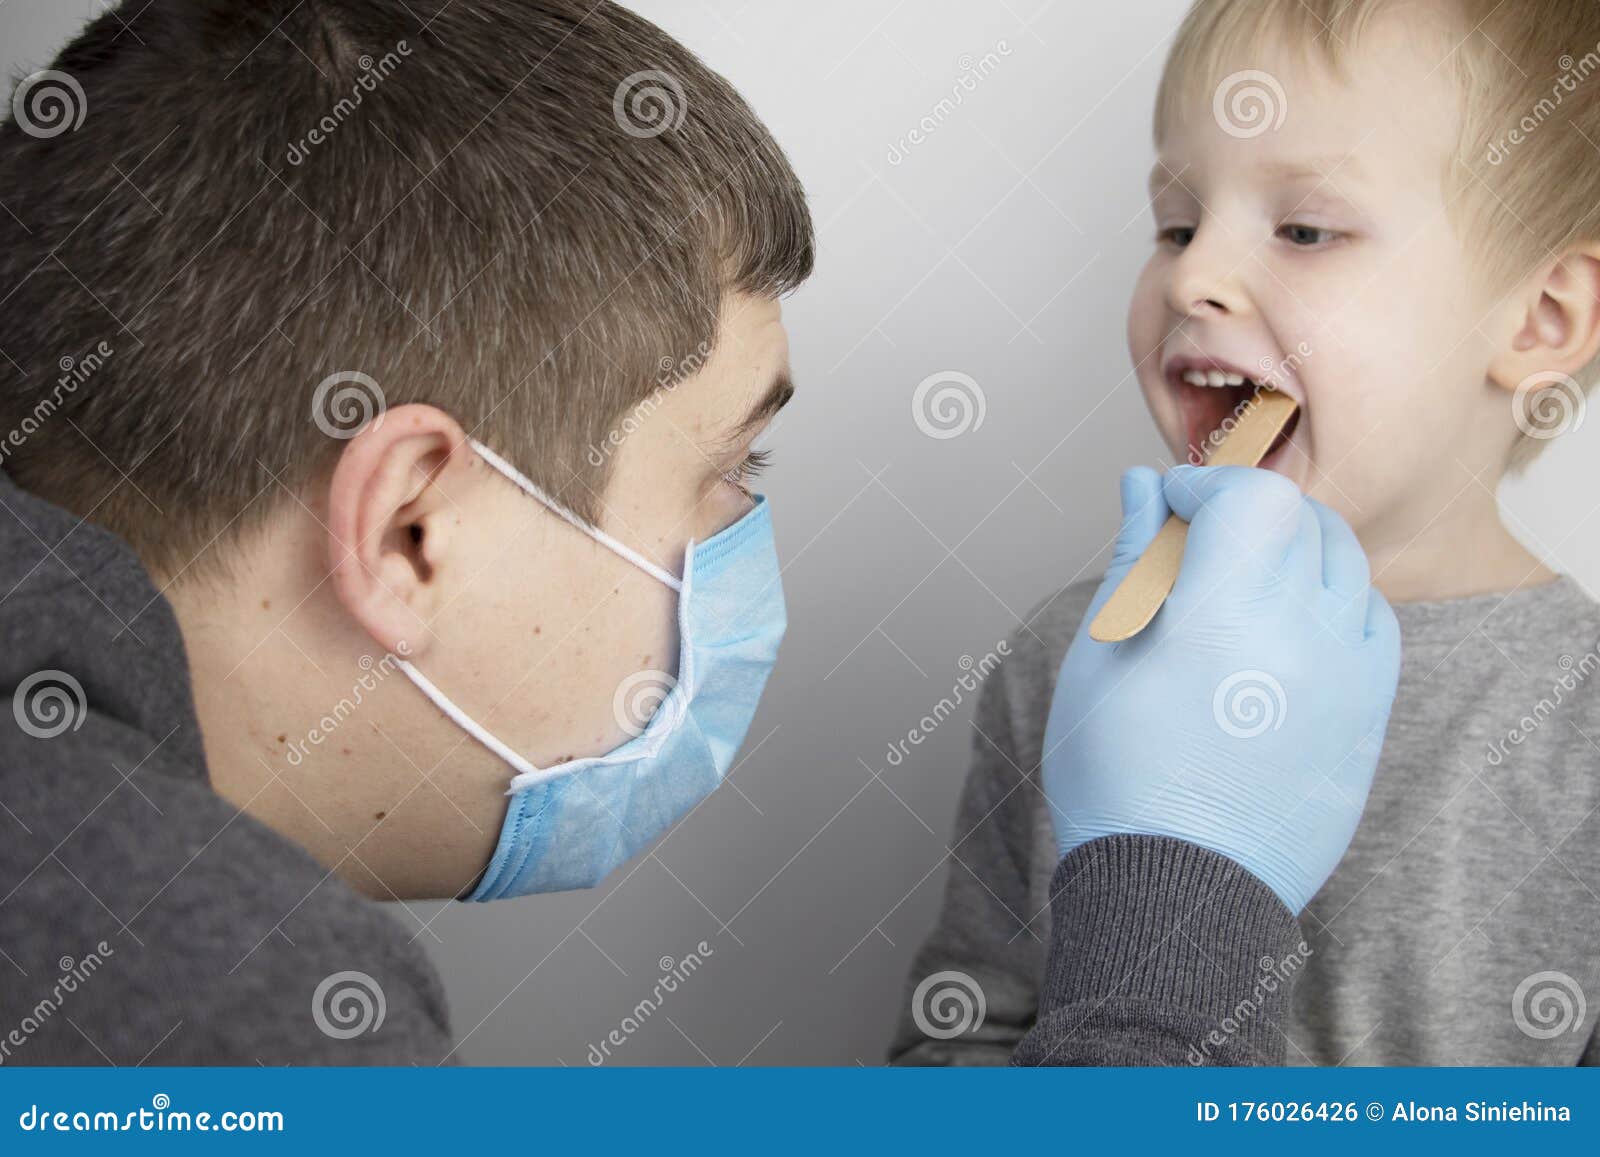 an otolaryngologist examines a child`s throat with a wooden spatula. a possible diagnosis is inflammation of the pharynx, tonsils